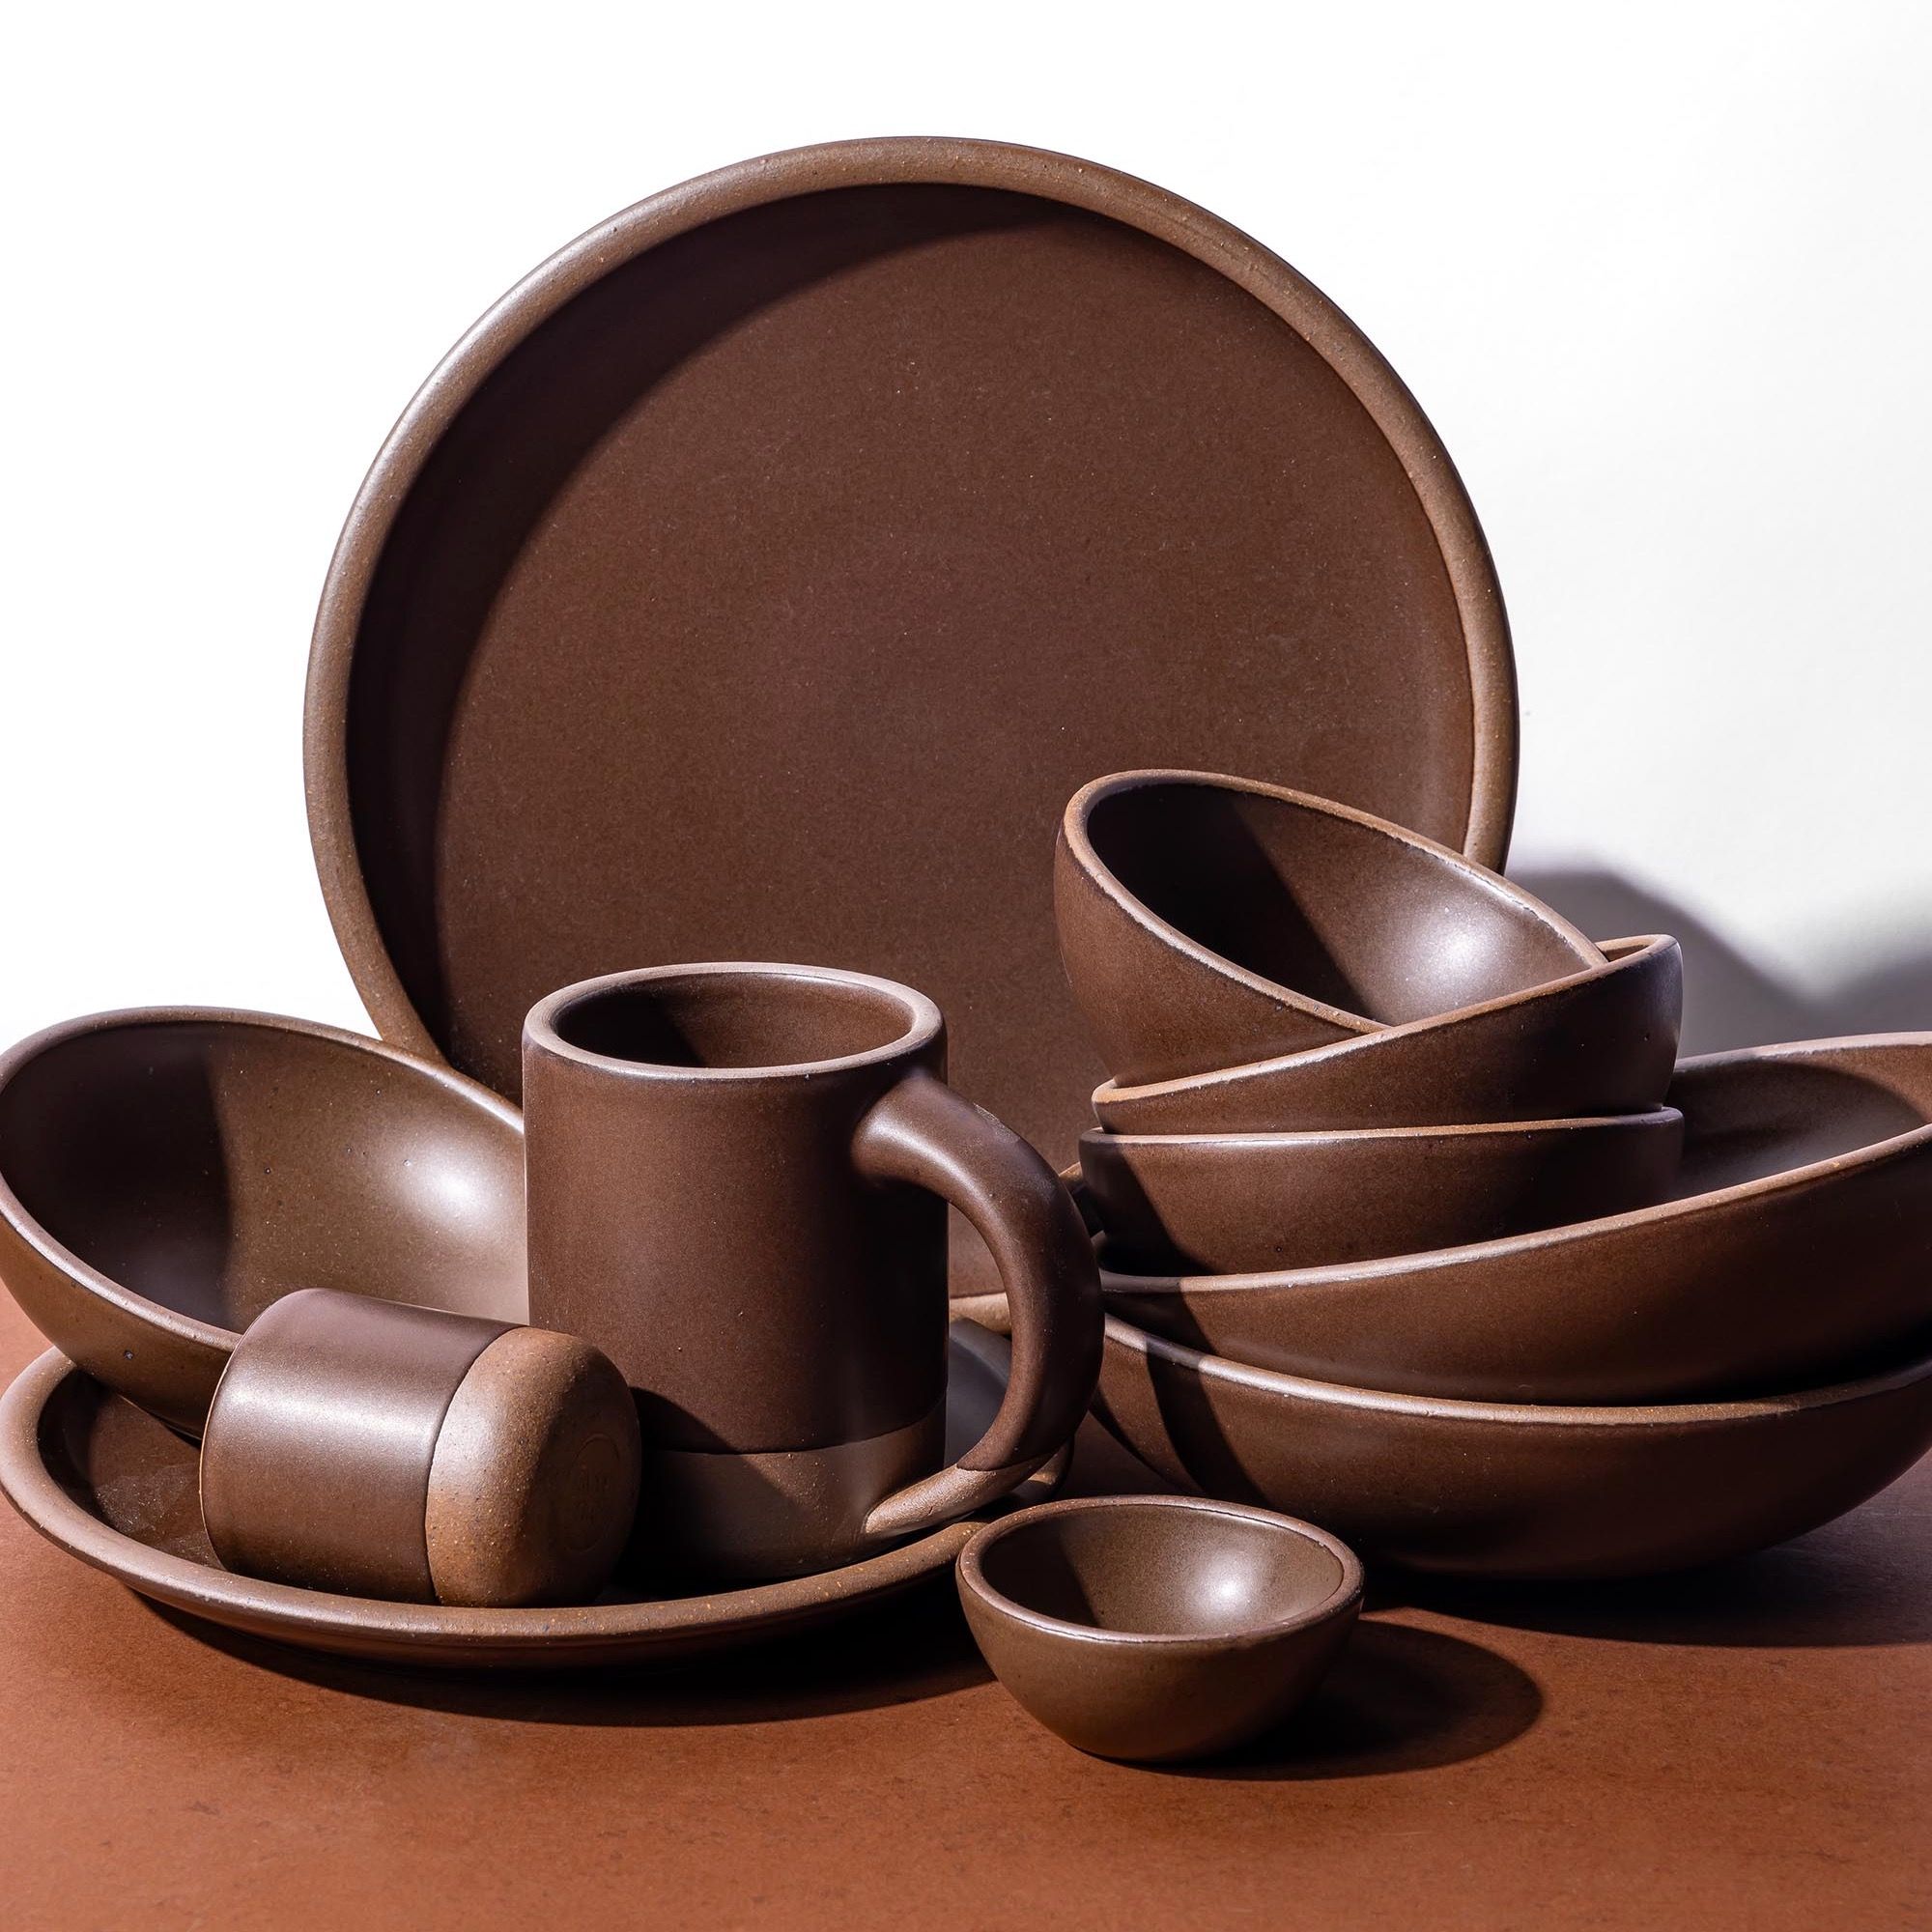 An up close look at ceramic plates, bowls, and cups, in a dark brown color stacked and arranged close together.